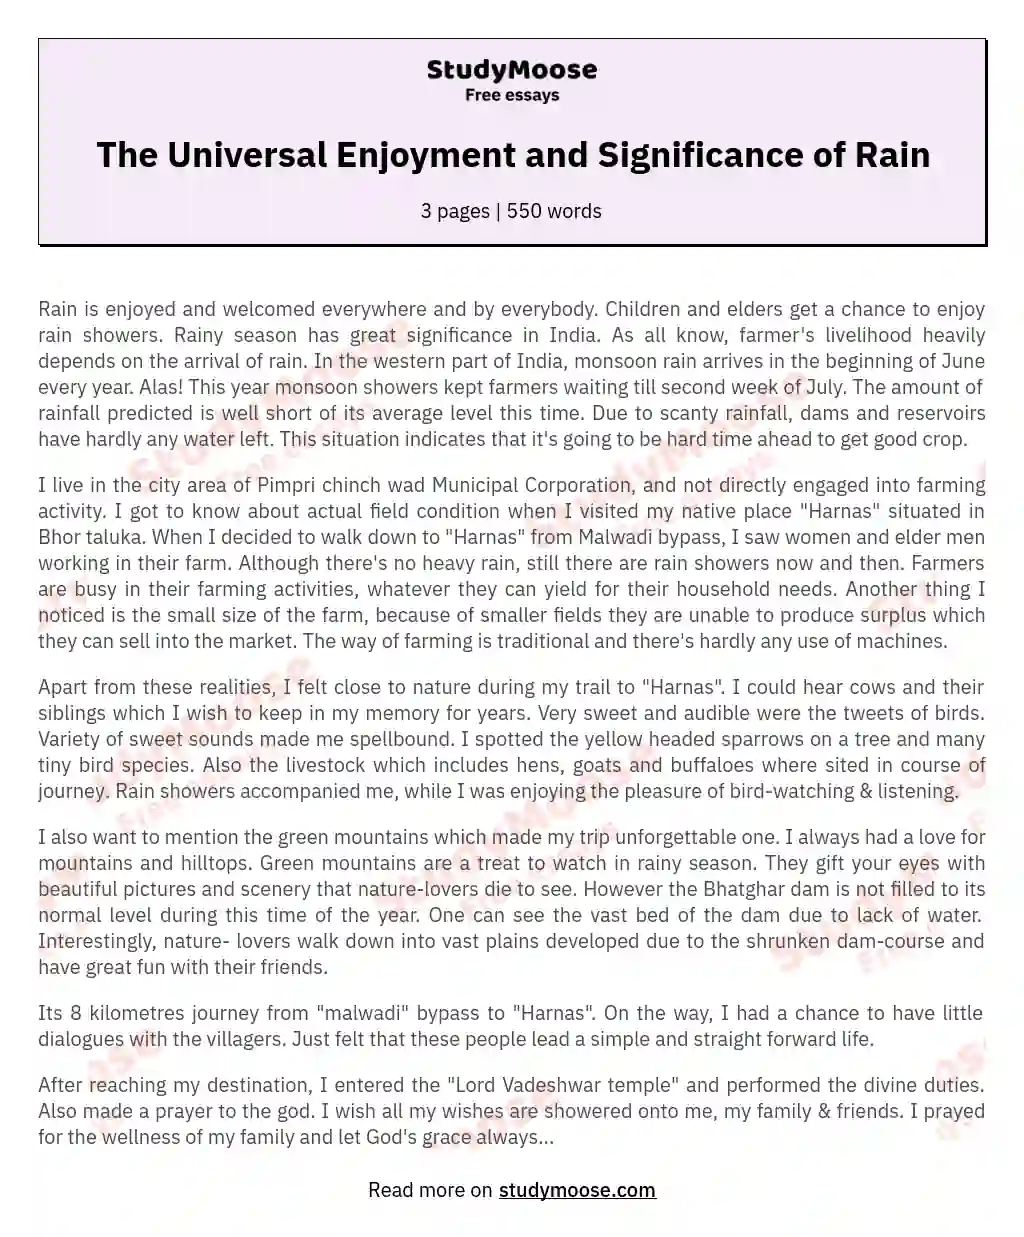 The Universal Enjoyment and Significance of Rain essay